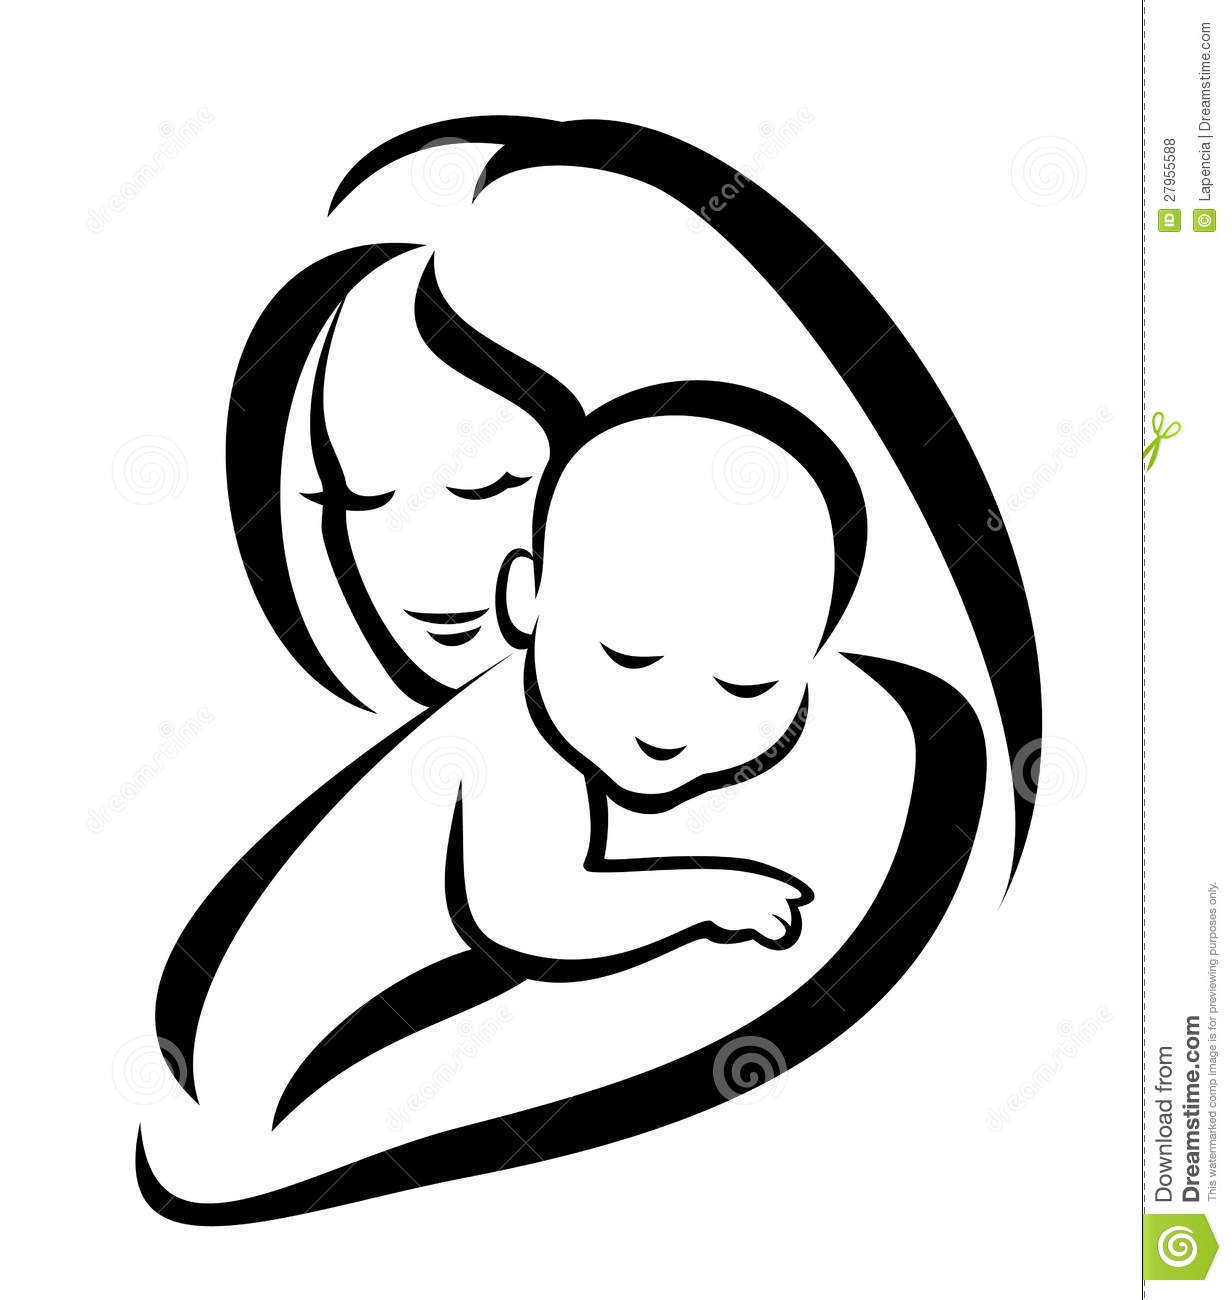 Mom and baby clipart.